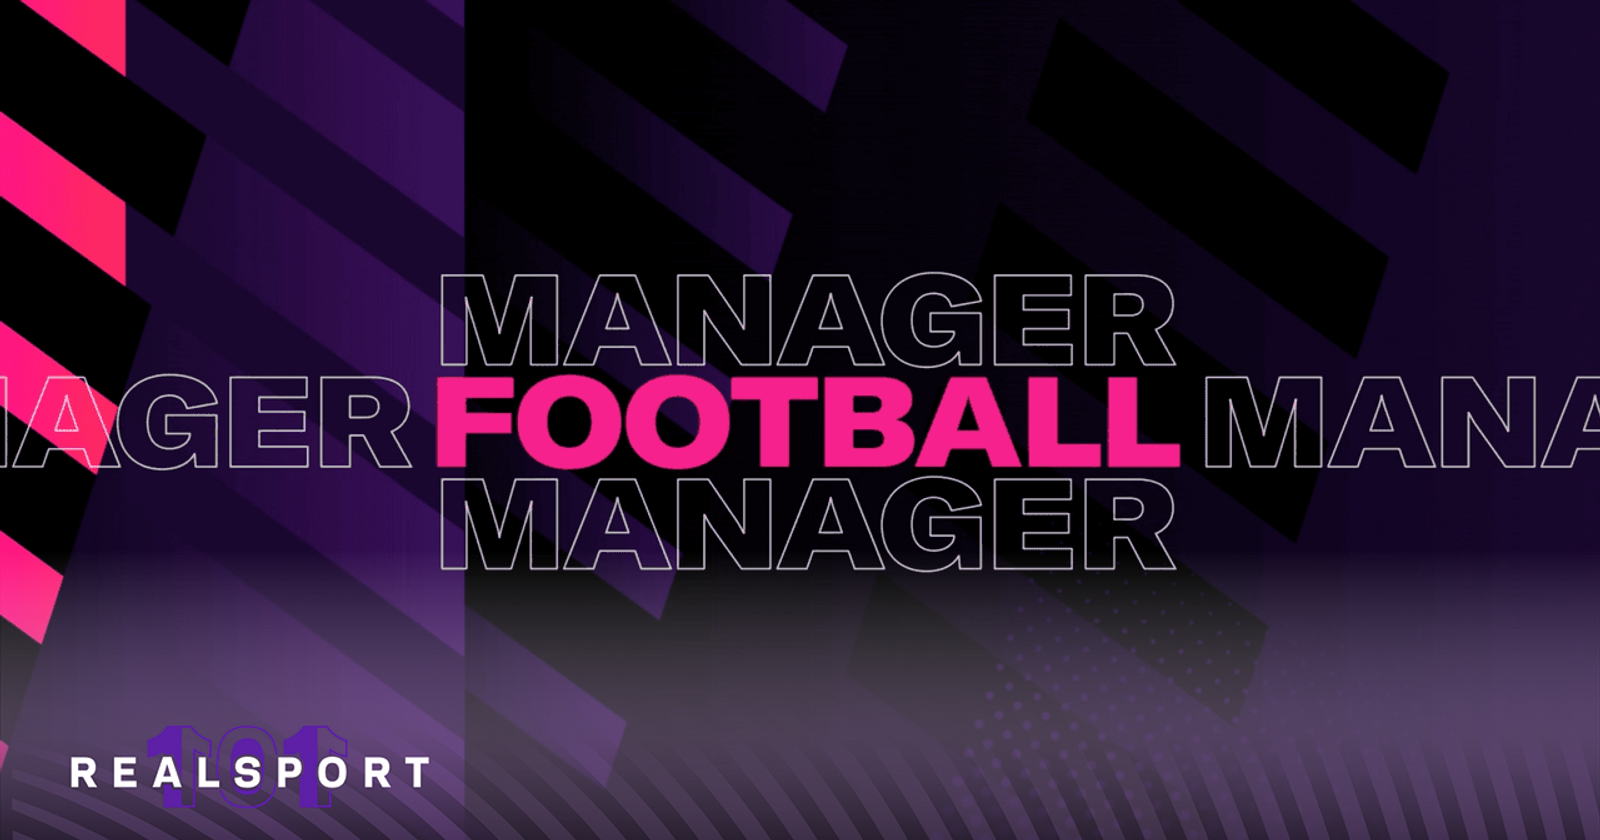 FOOTBALL MANAGER 2023 MOBILE NOW AVAILABLE FOR PRE-ORDER